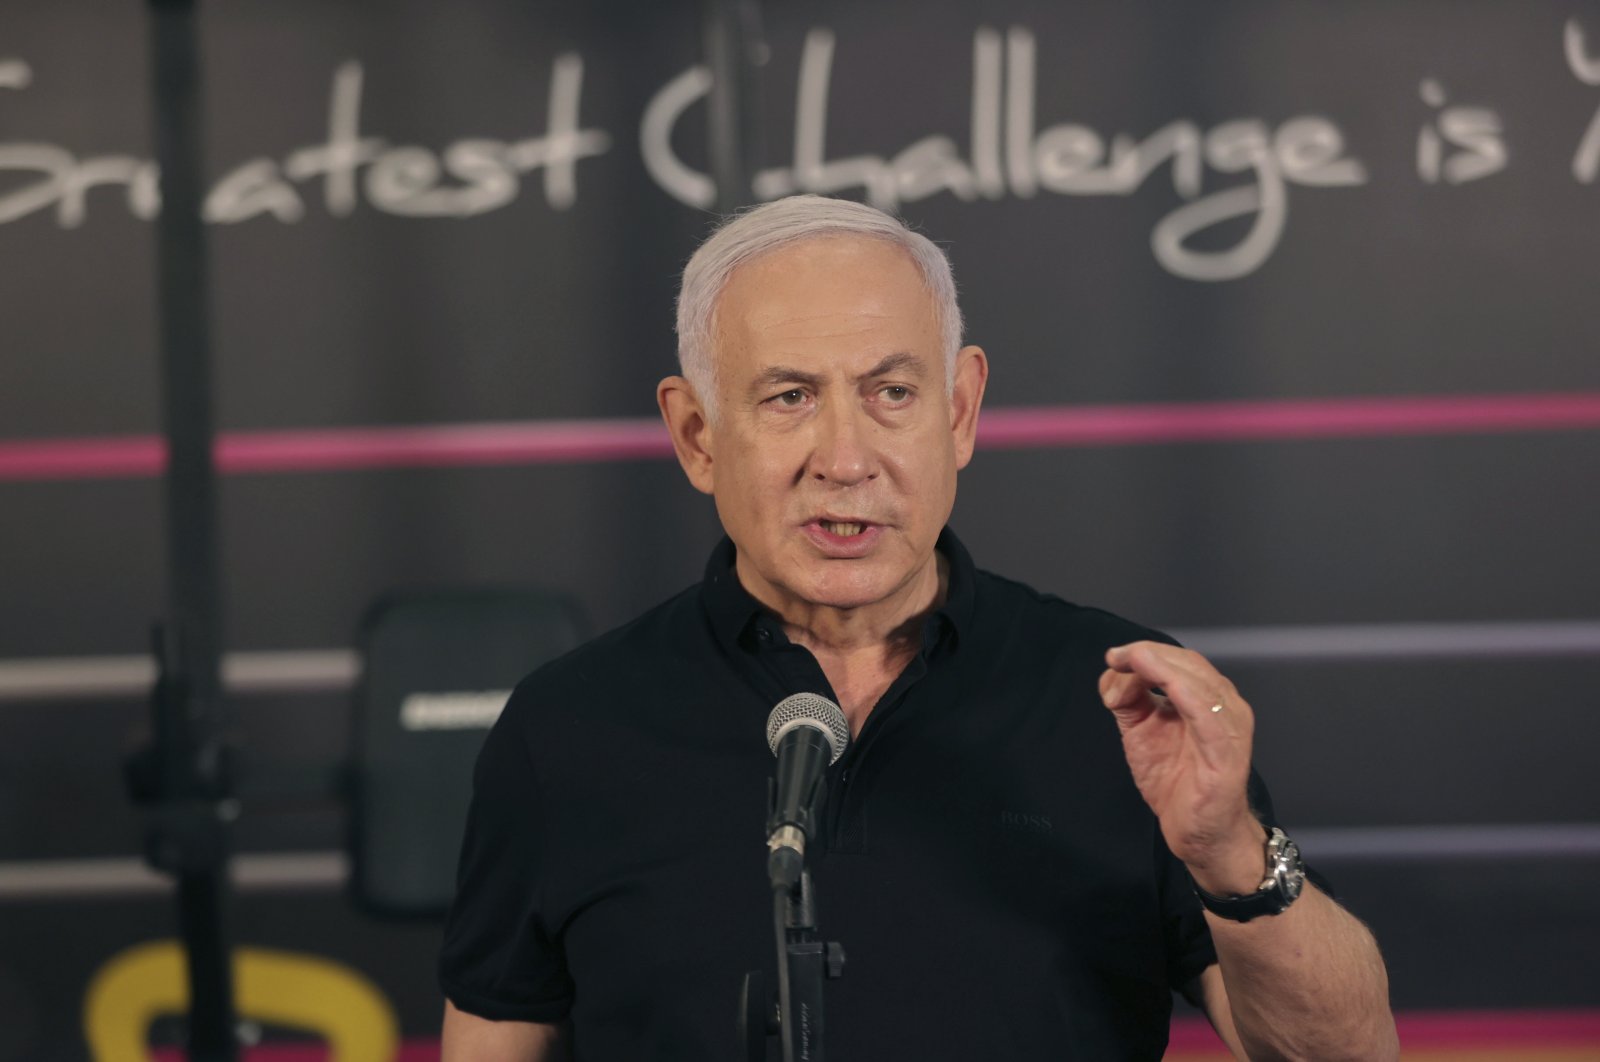 Israeli Prime Minister Benjamin Netanyahu talks to the media during a visit to the Fitness gym ahead of the re-opening of the branch in Petah Tikva, Israel, Feb. 20, 2021. (AP Photo)